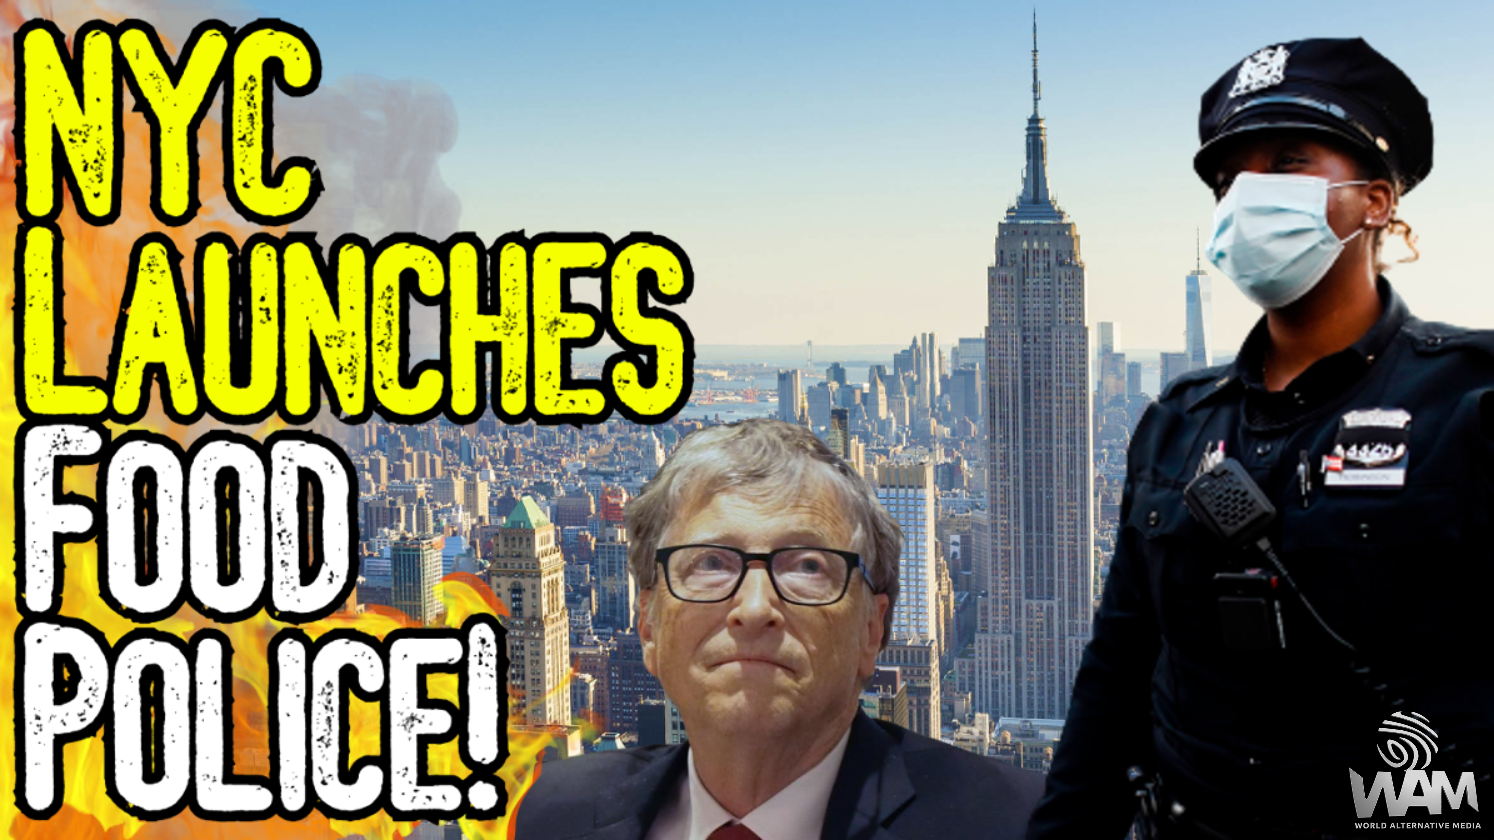 nyc to launch food police thumbnail.png